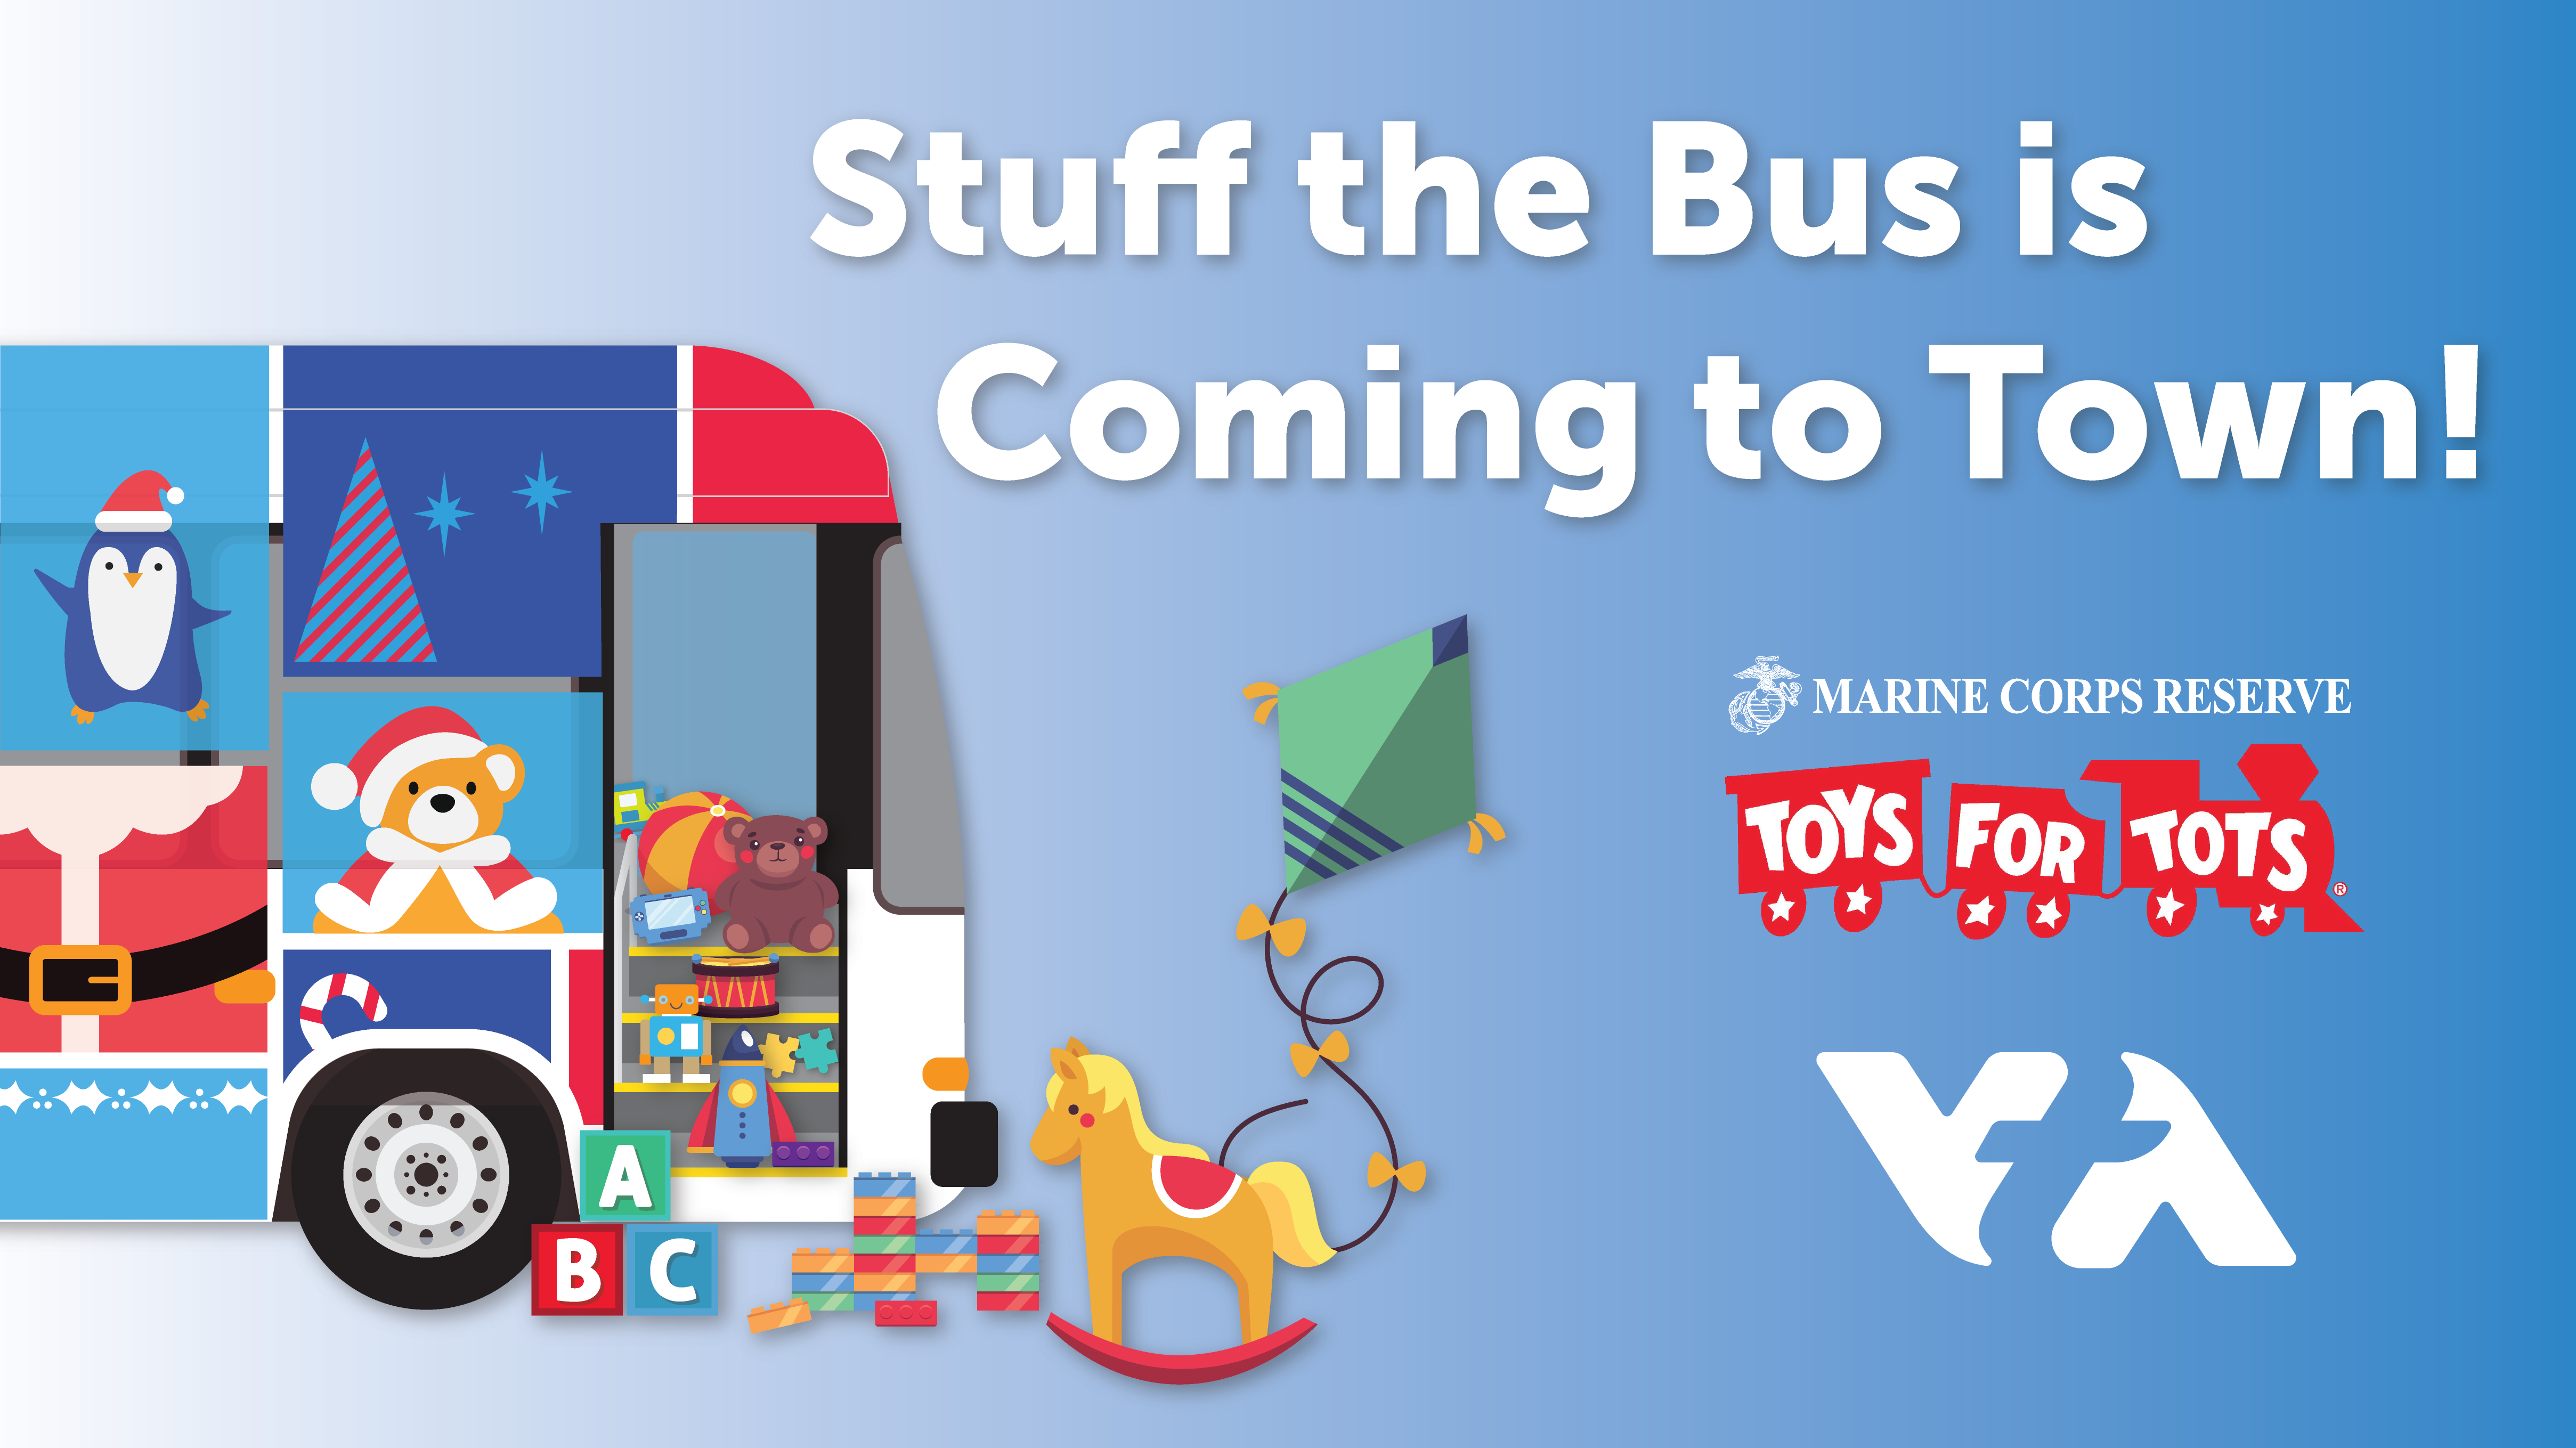 Stuff the Bus is Coming to Town! VTA